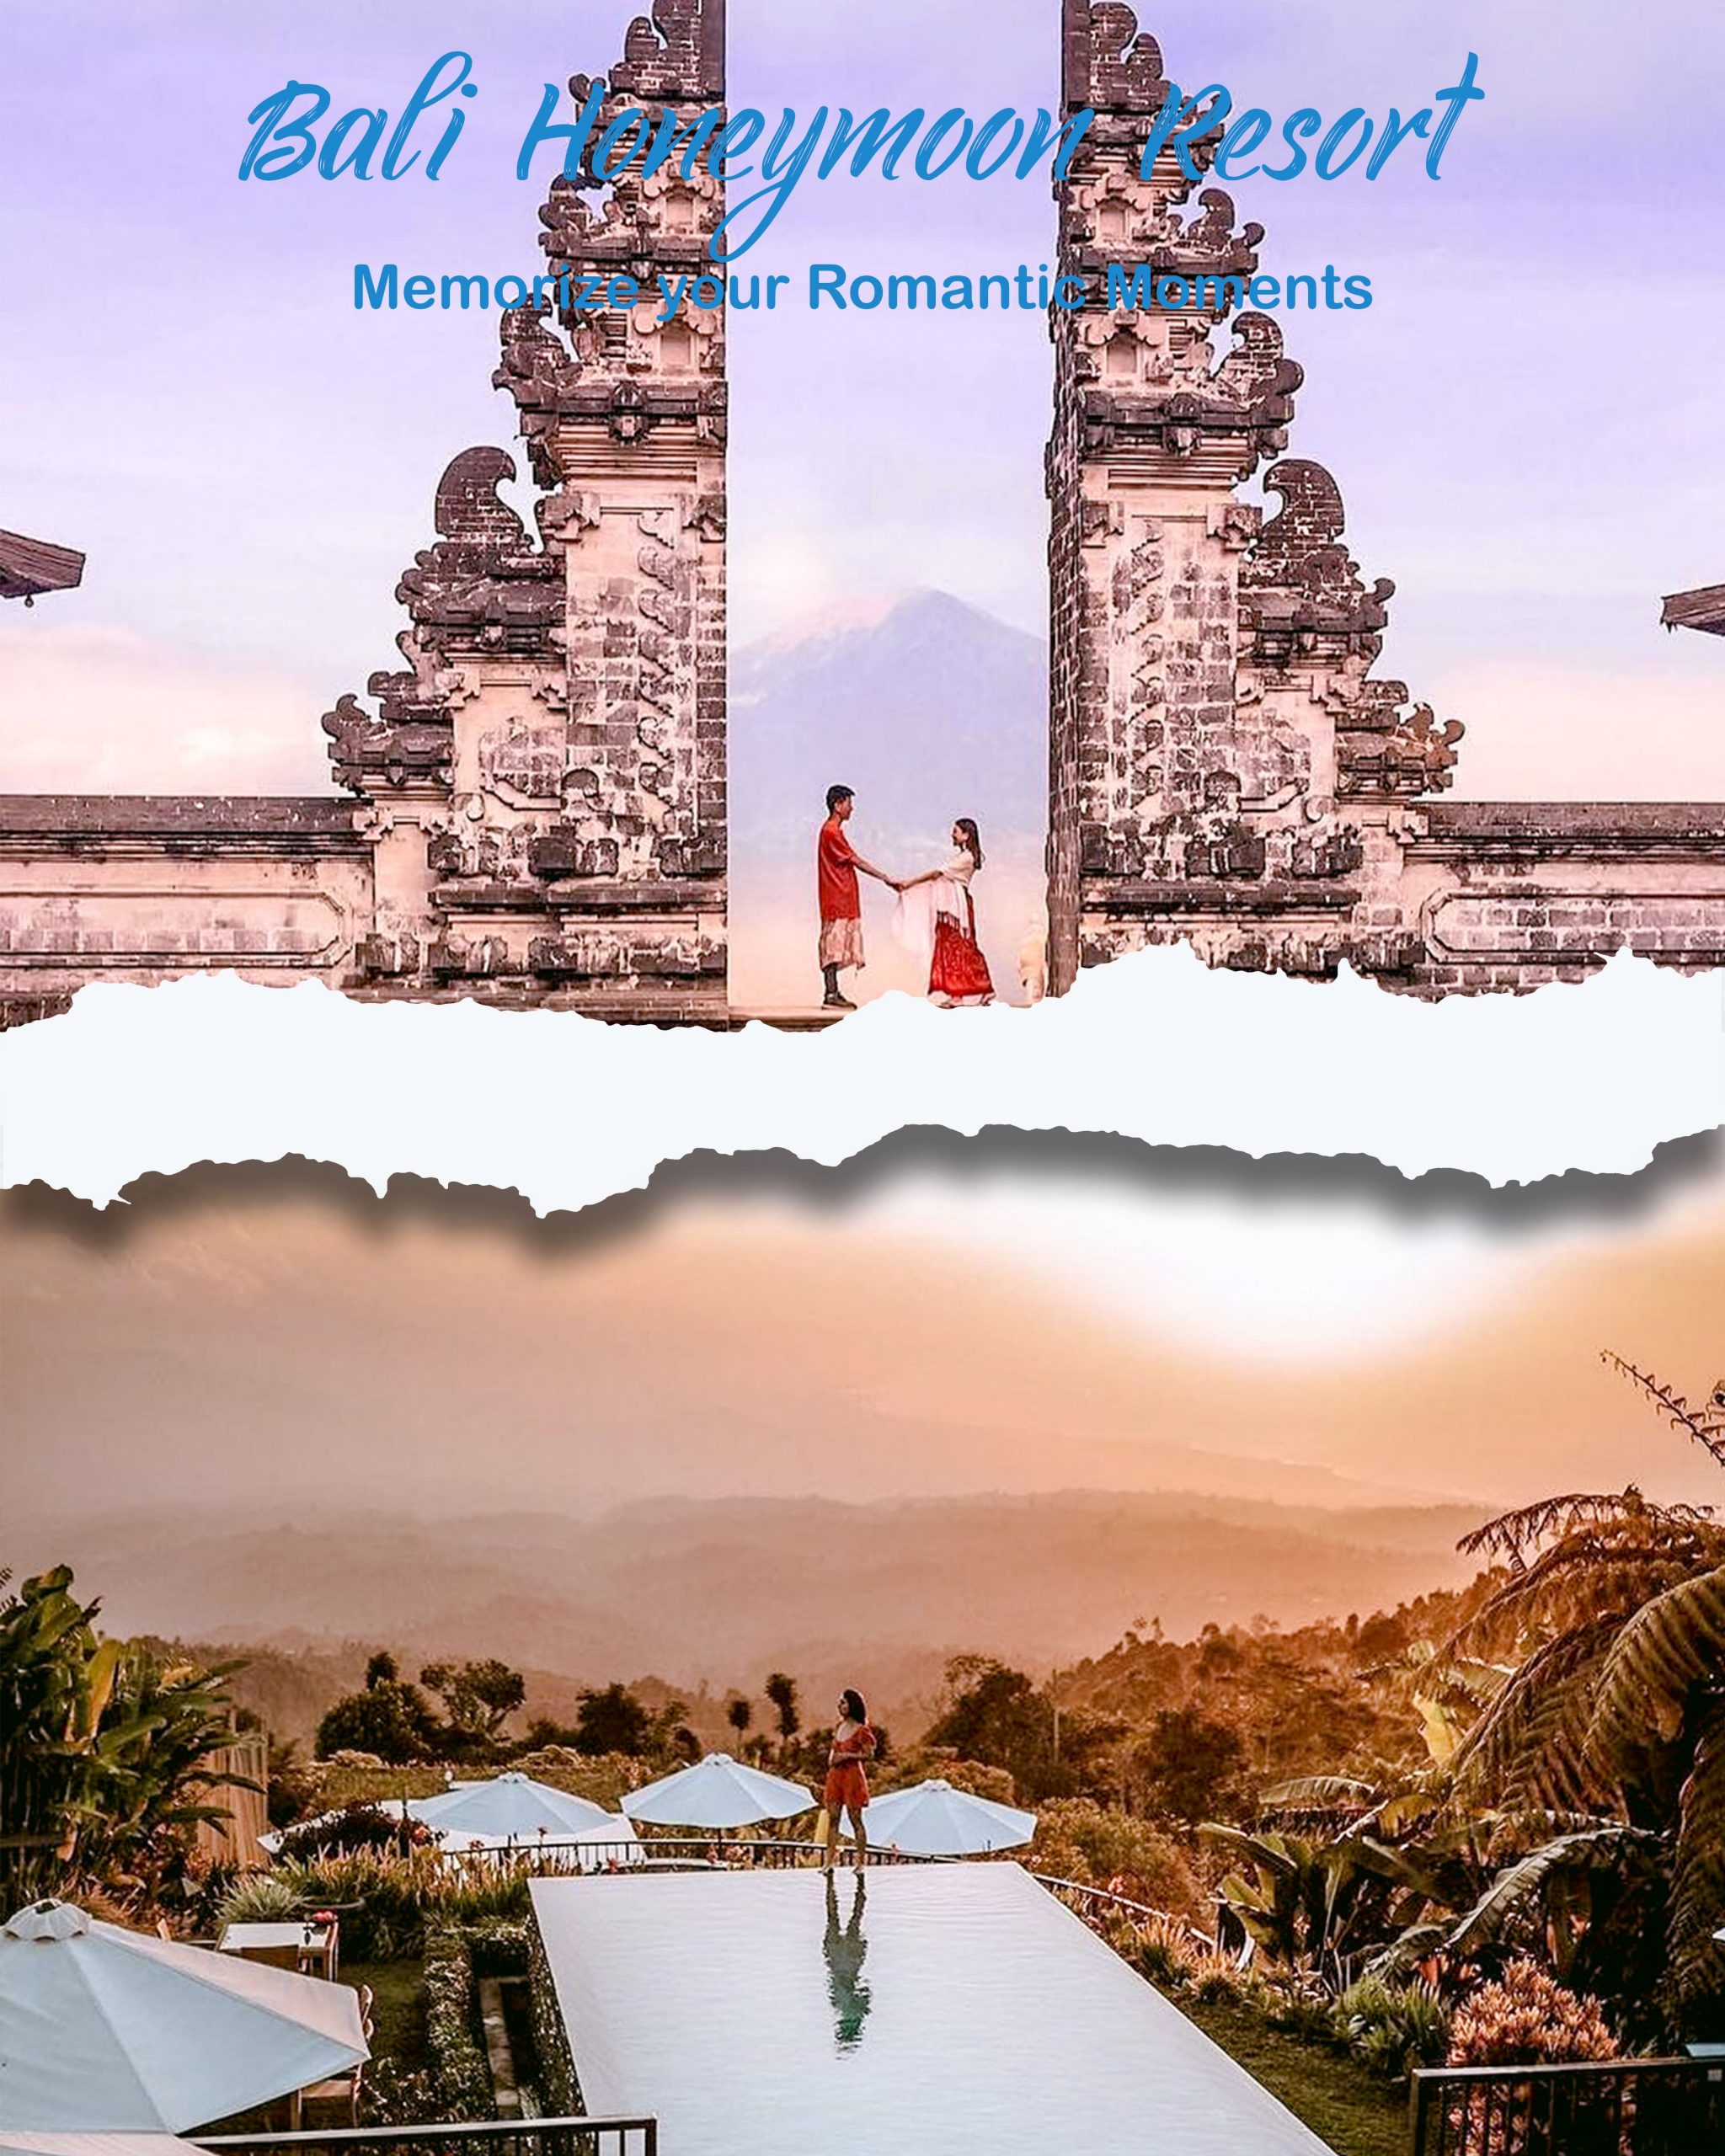 Bali Honeymoon Resort To Memorize Your Romantic Moments Experience Bali With The Best Tour